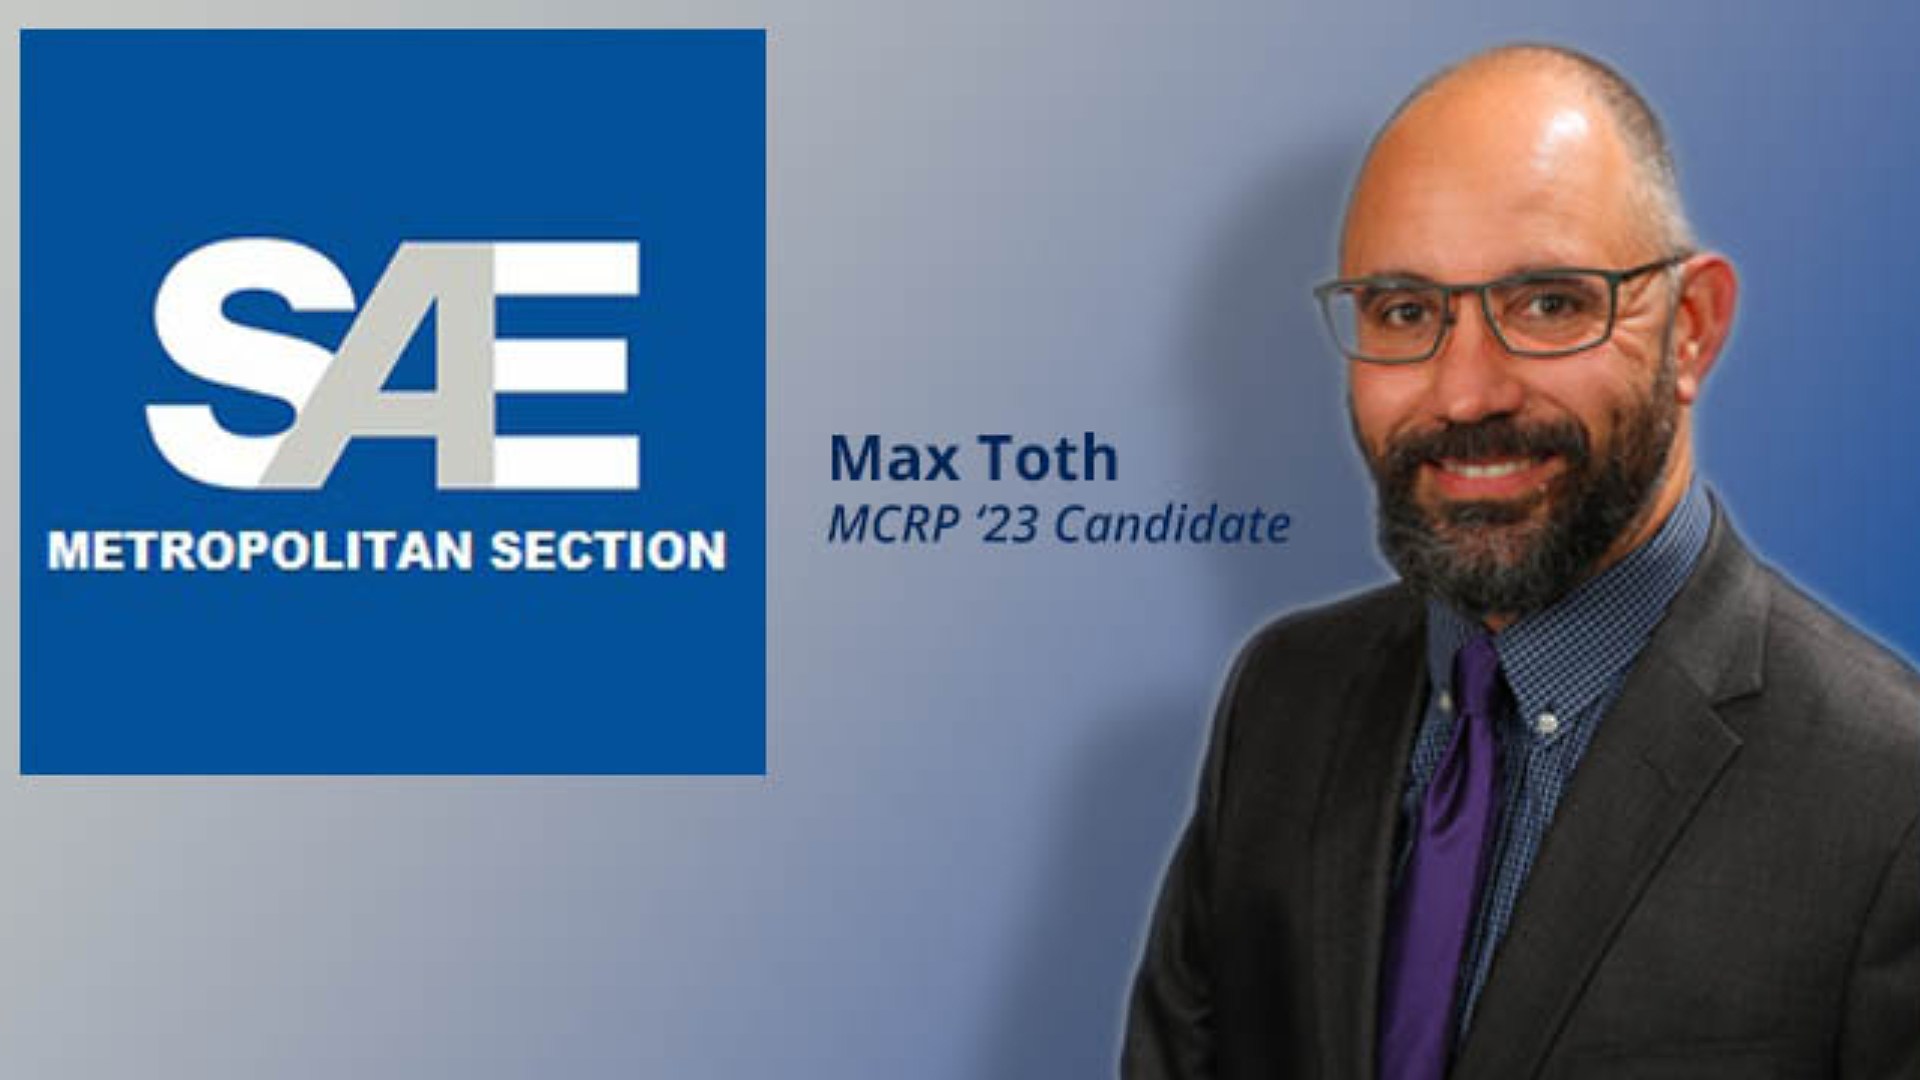 Max Toth MCRP ’23 is recipient of SAE Metro Section Fellowship